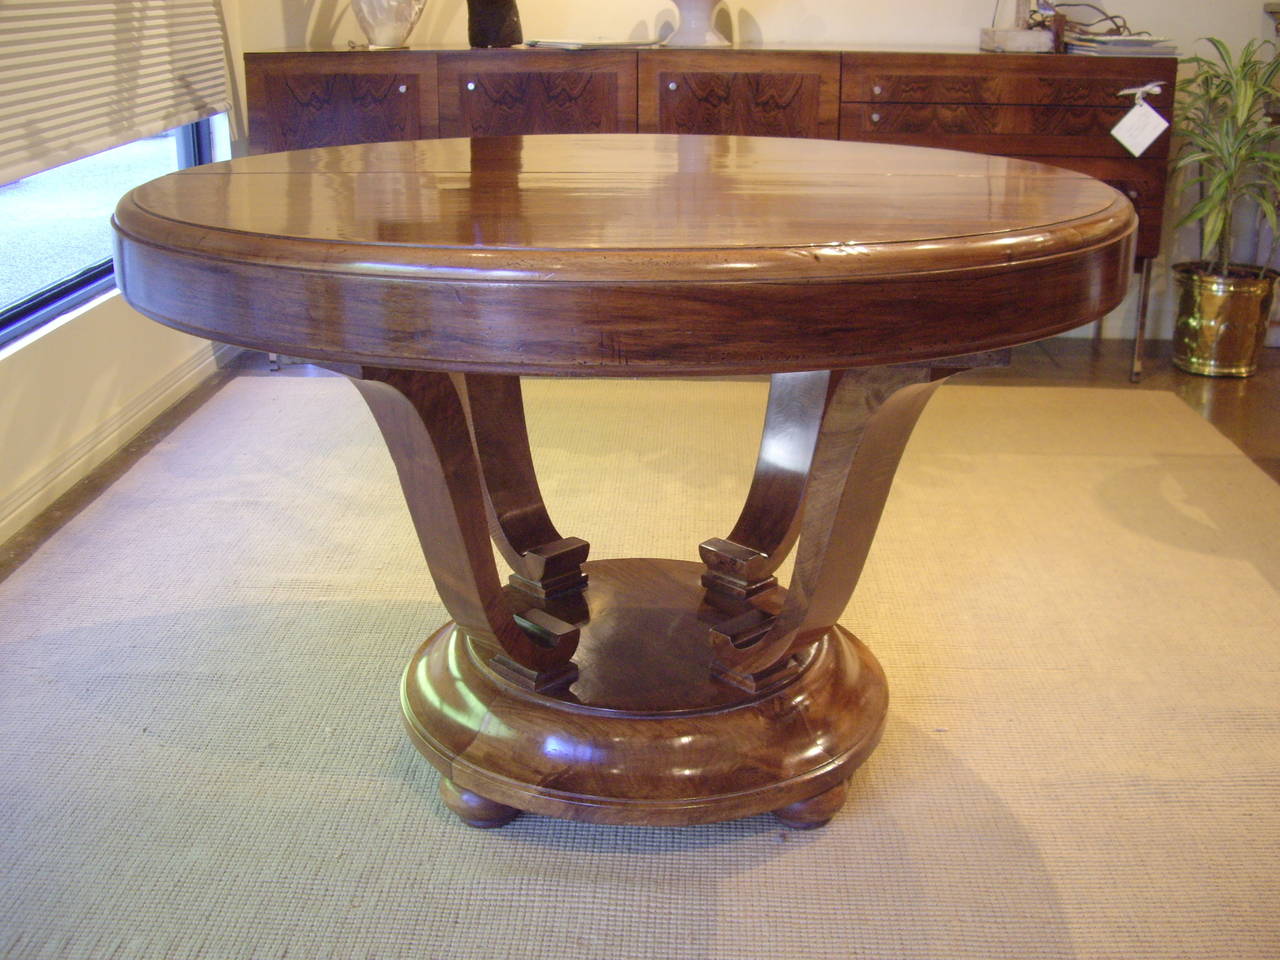 Beautiful French walnut Art Deco Table.  Can be used as a center hall table closed or a dining table open with three leaves.  As a dining table it can seat 8 comfortably.  It has been carefully restored.  It has legs that fold up when closed. 